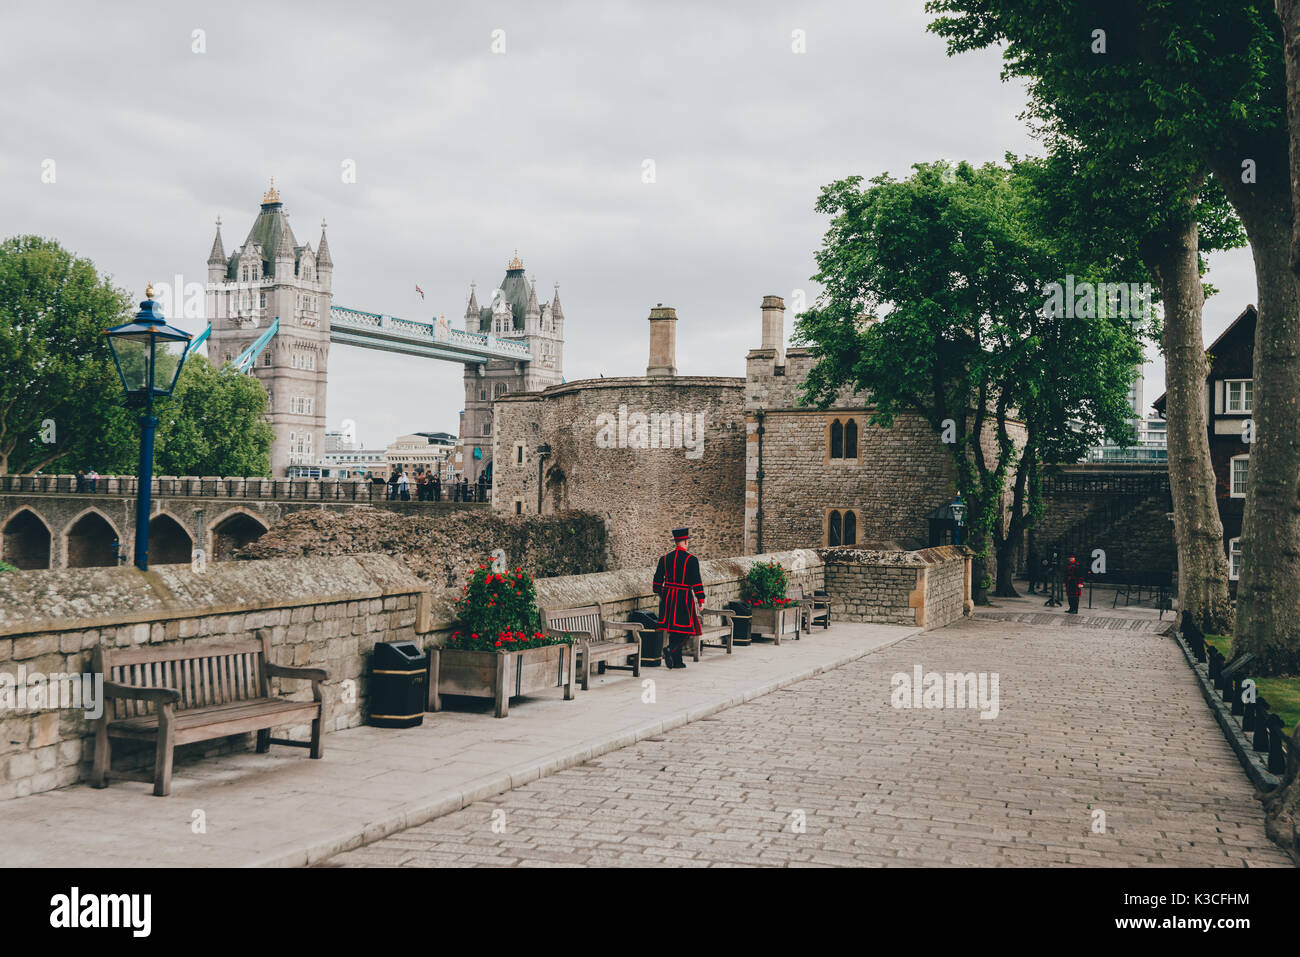 Beefeater guard with the tower bridge in the background Stock Photo